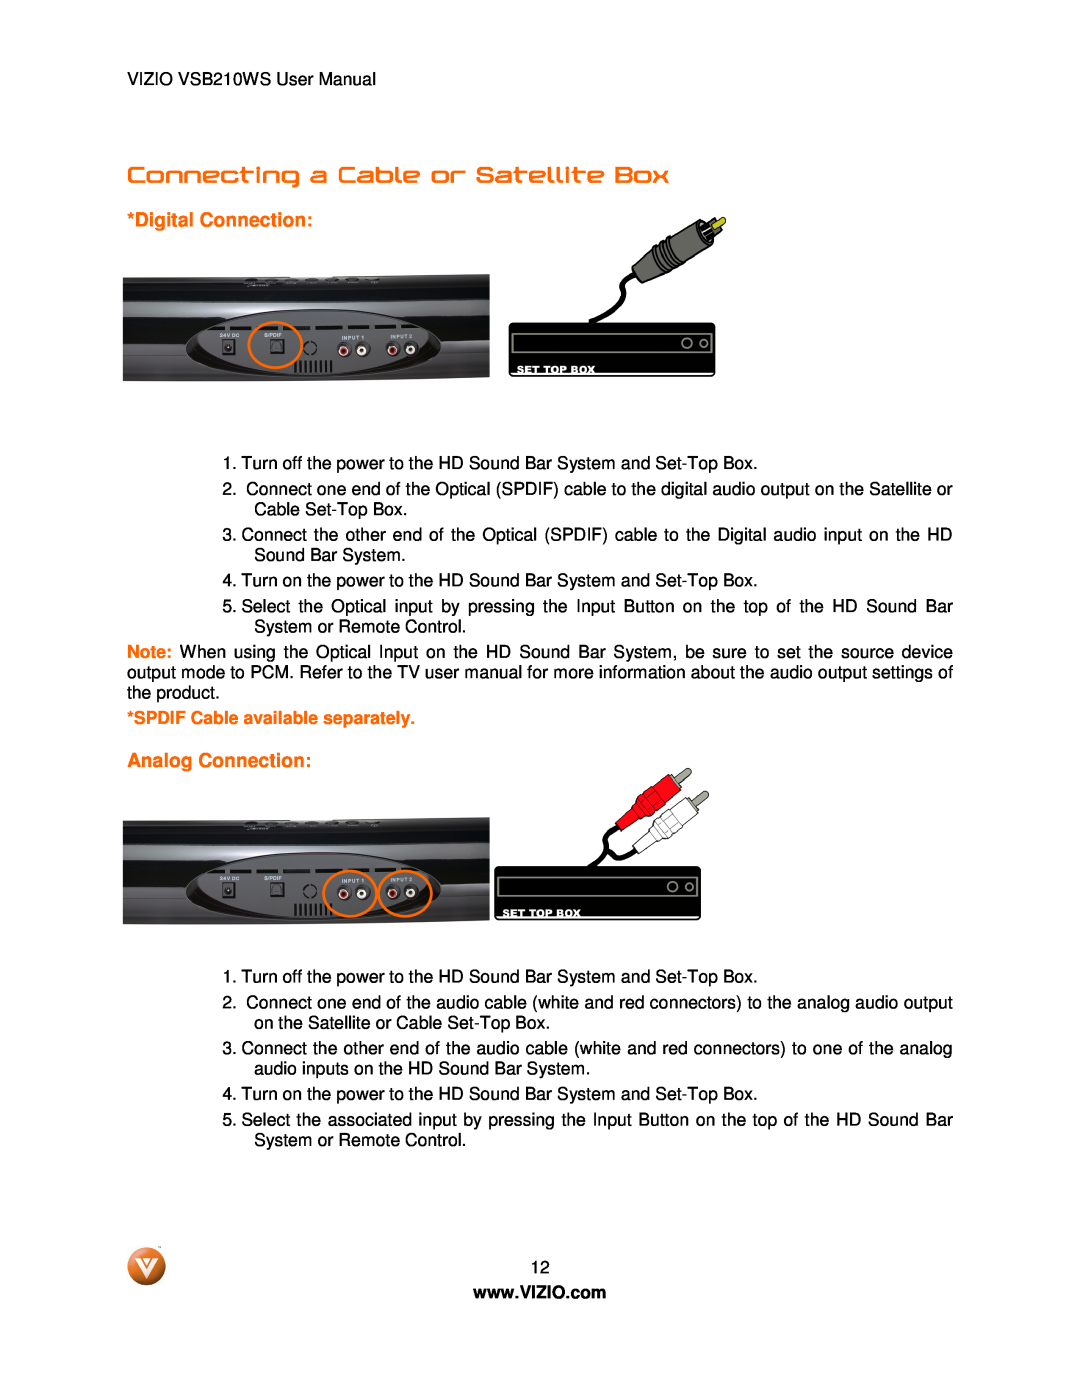 Vizio VSB210WS user manual Connecting a Cable or Satellite Box, Digital Connection, Analog Connection 